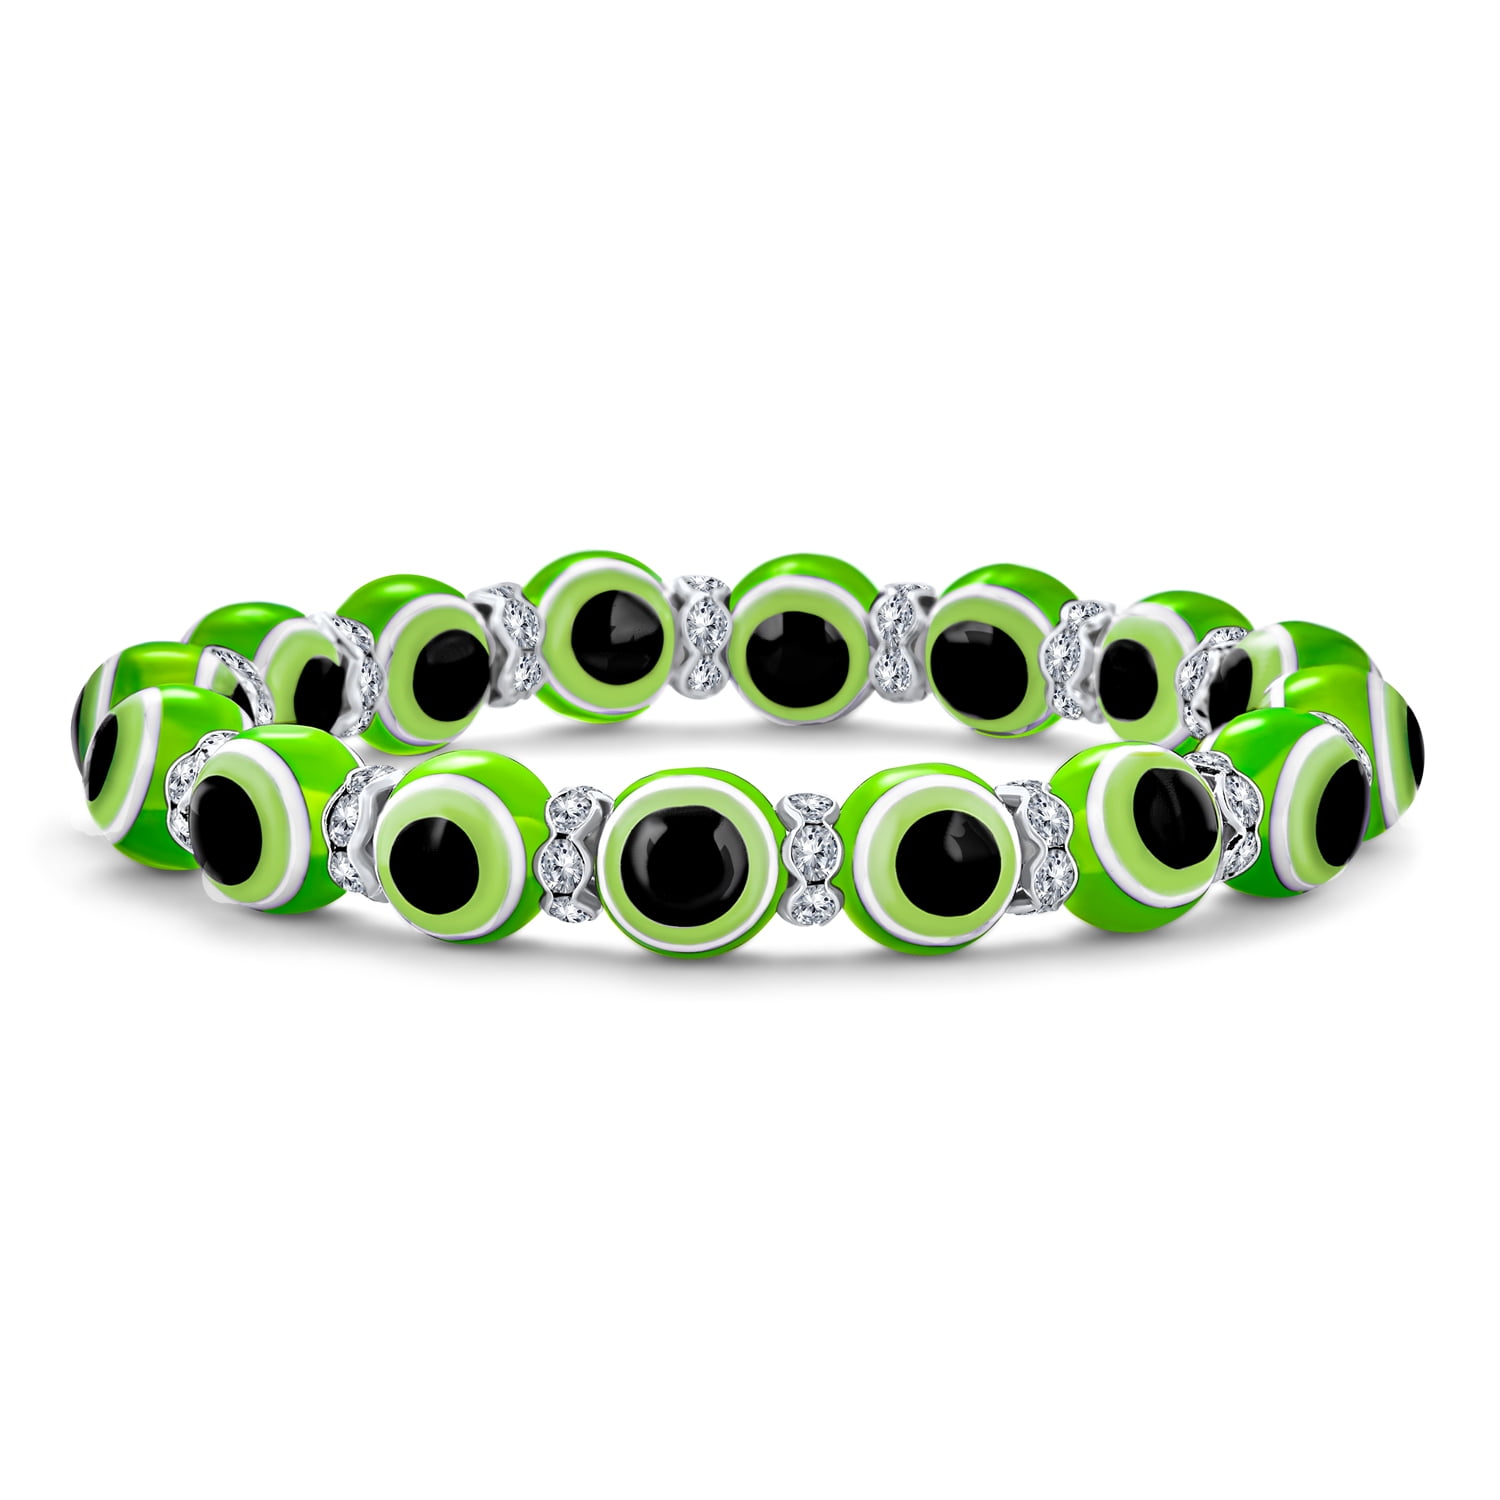 Buy ASTROGHAR Evil Eye Box Shaped Protection Stretch Bracelet For Men And  Women Online In India At Discounted Prices